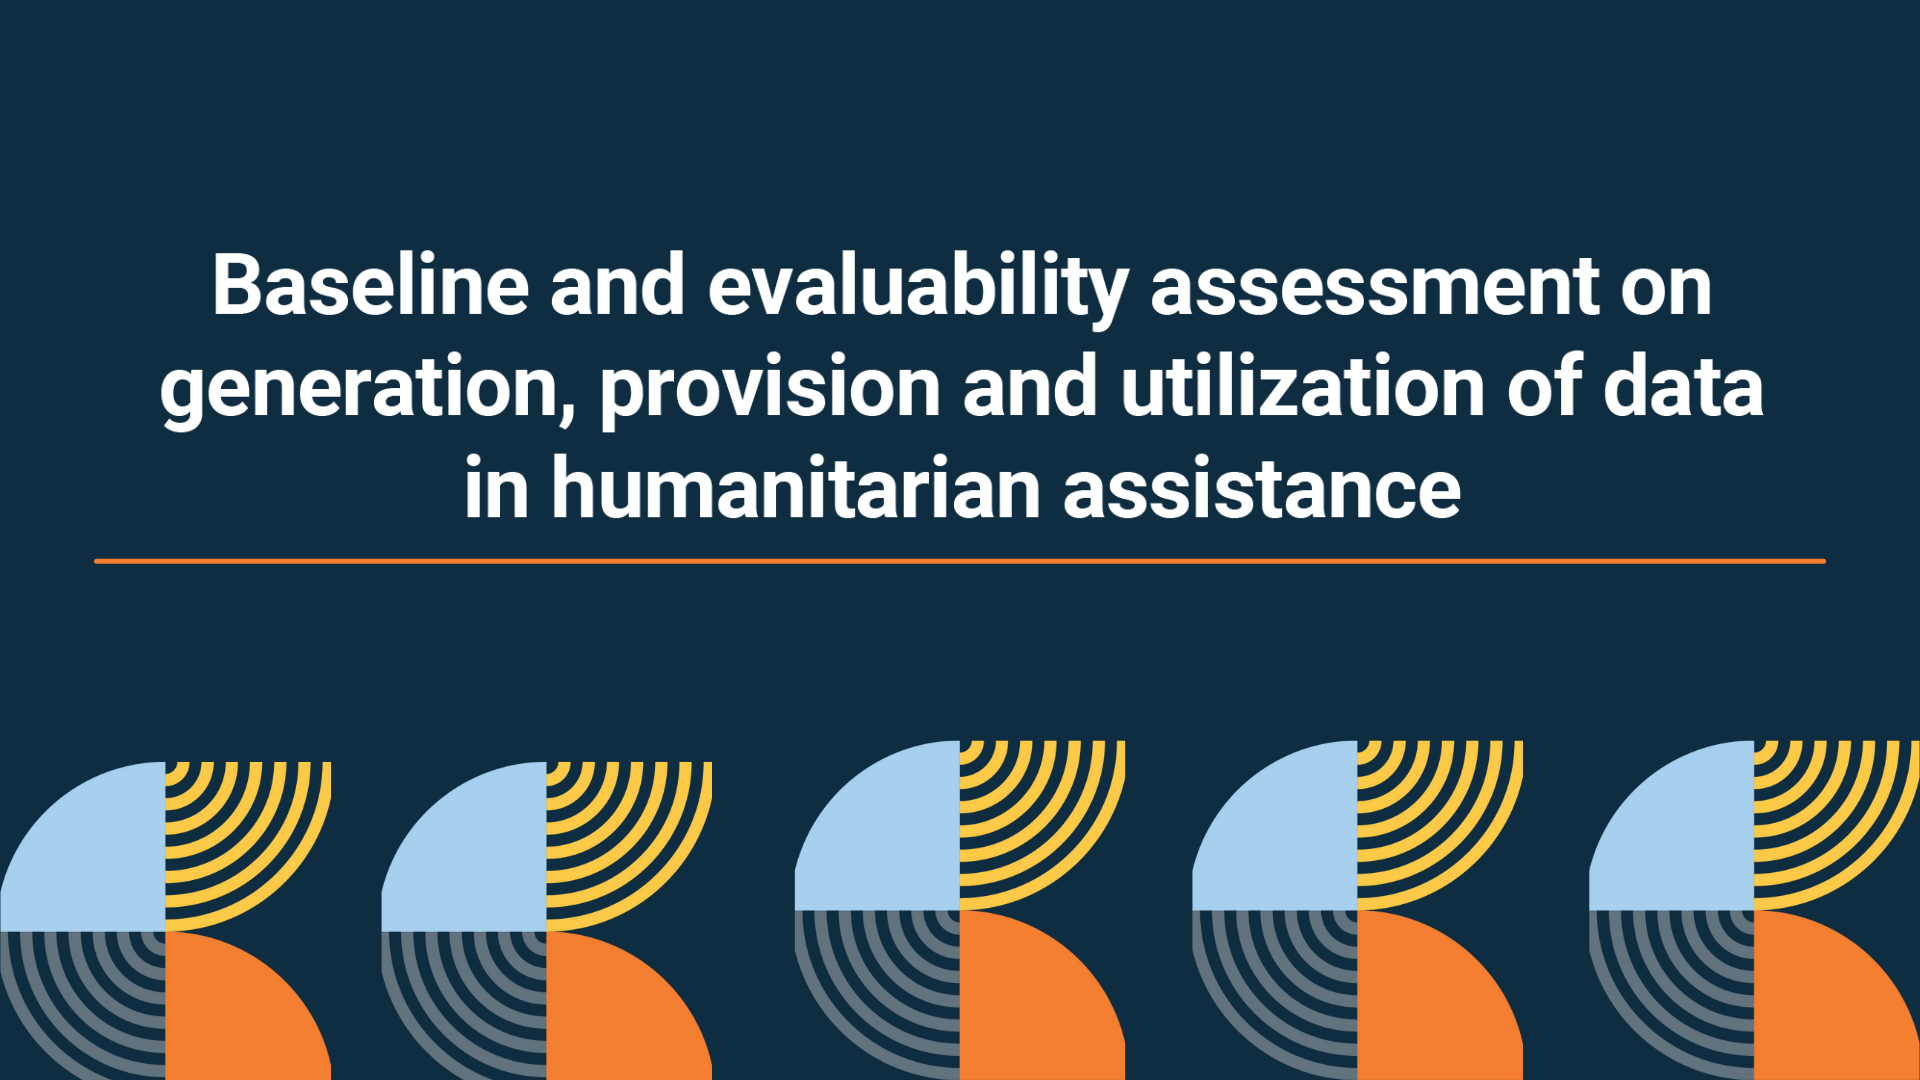 Baseline and evaluability assessment on generation, provision and utilization of data in humanitarian assistance